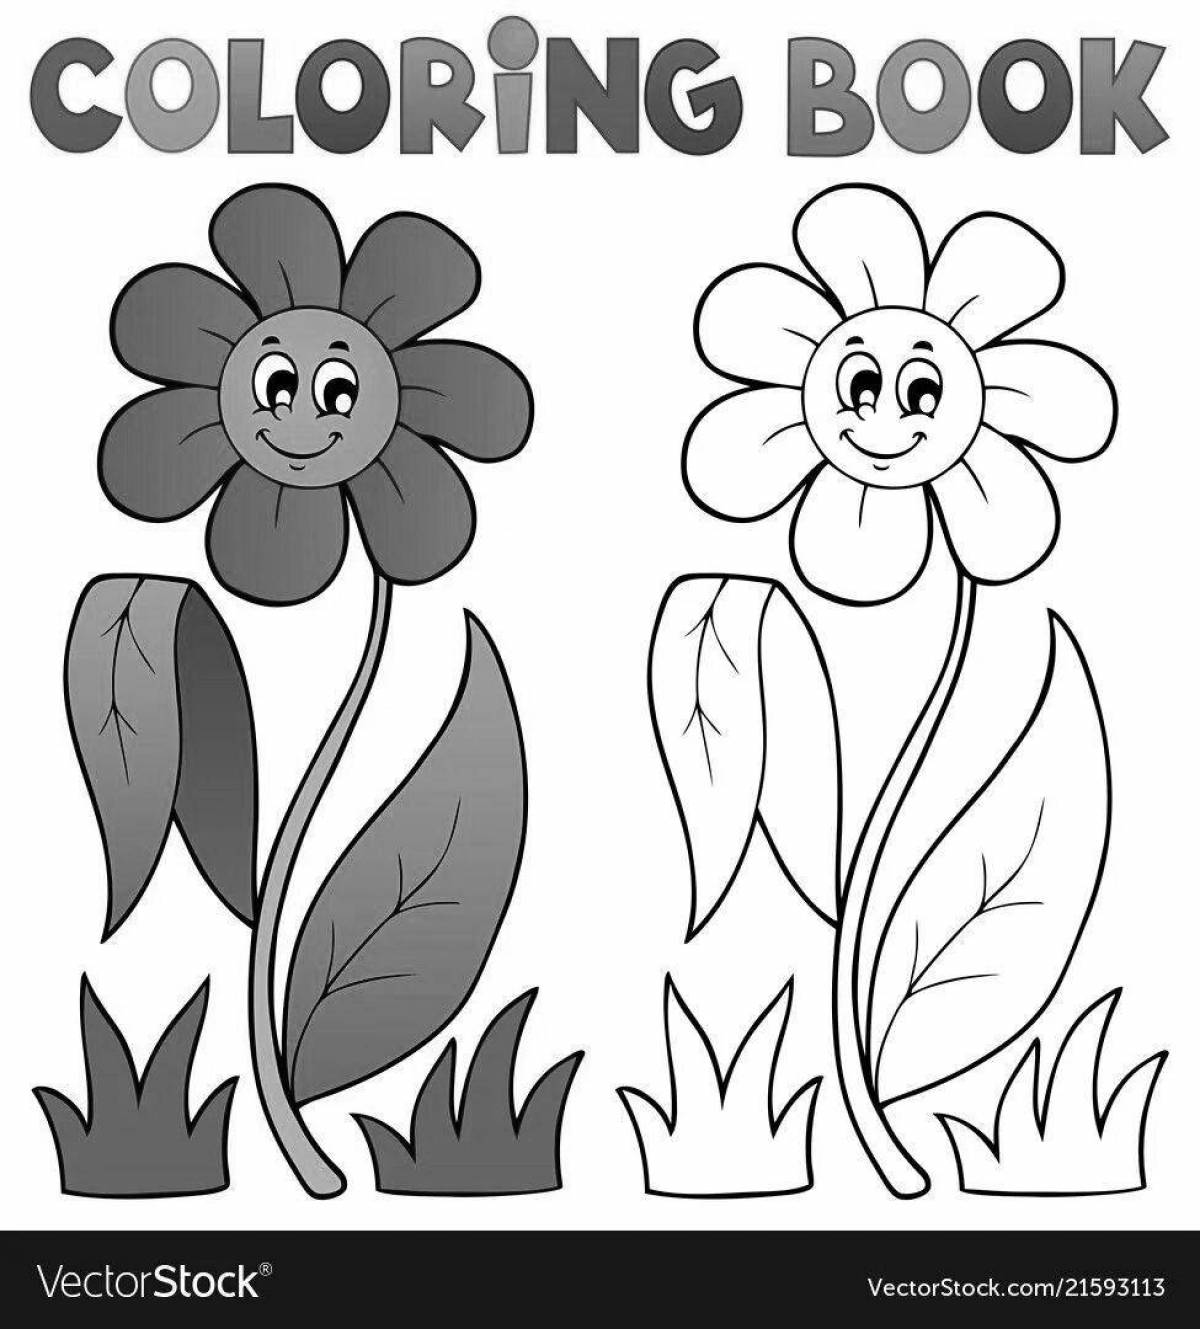 Cute coloring book for kids